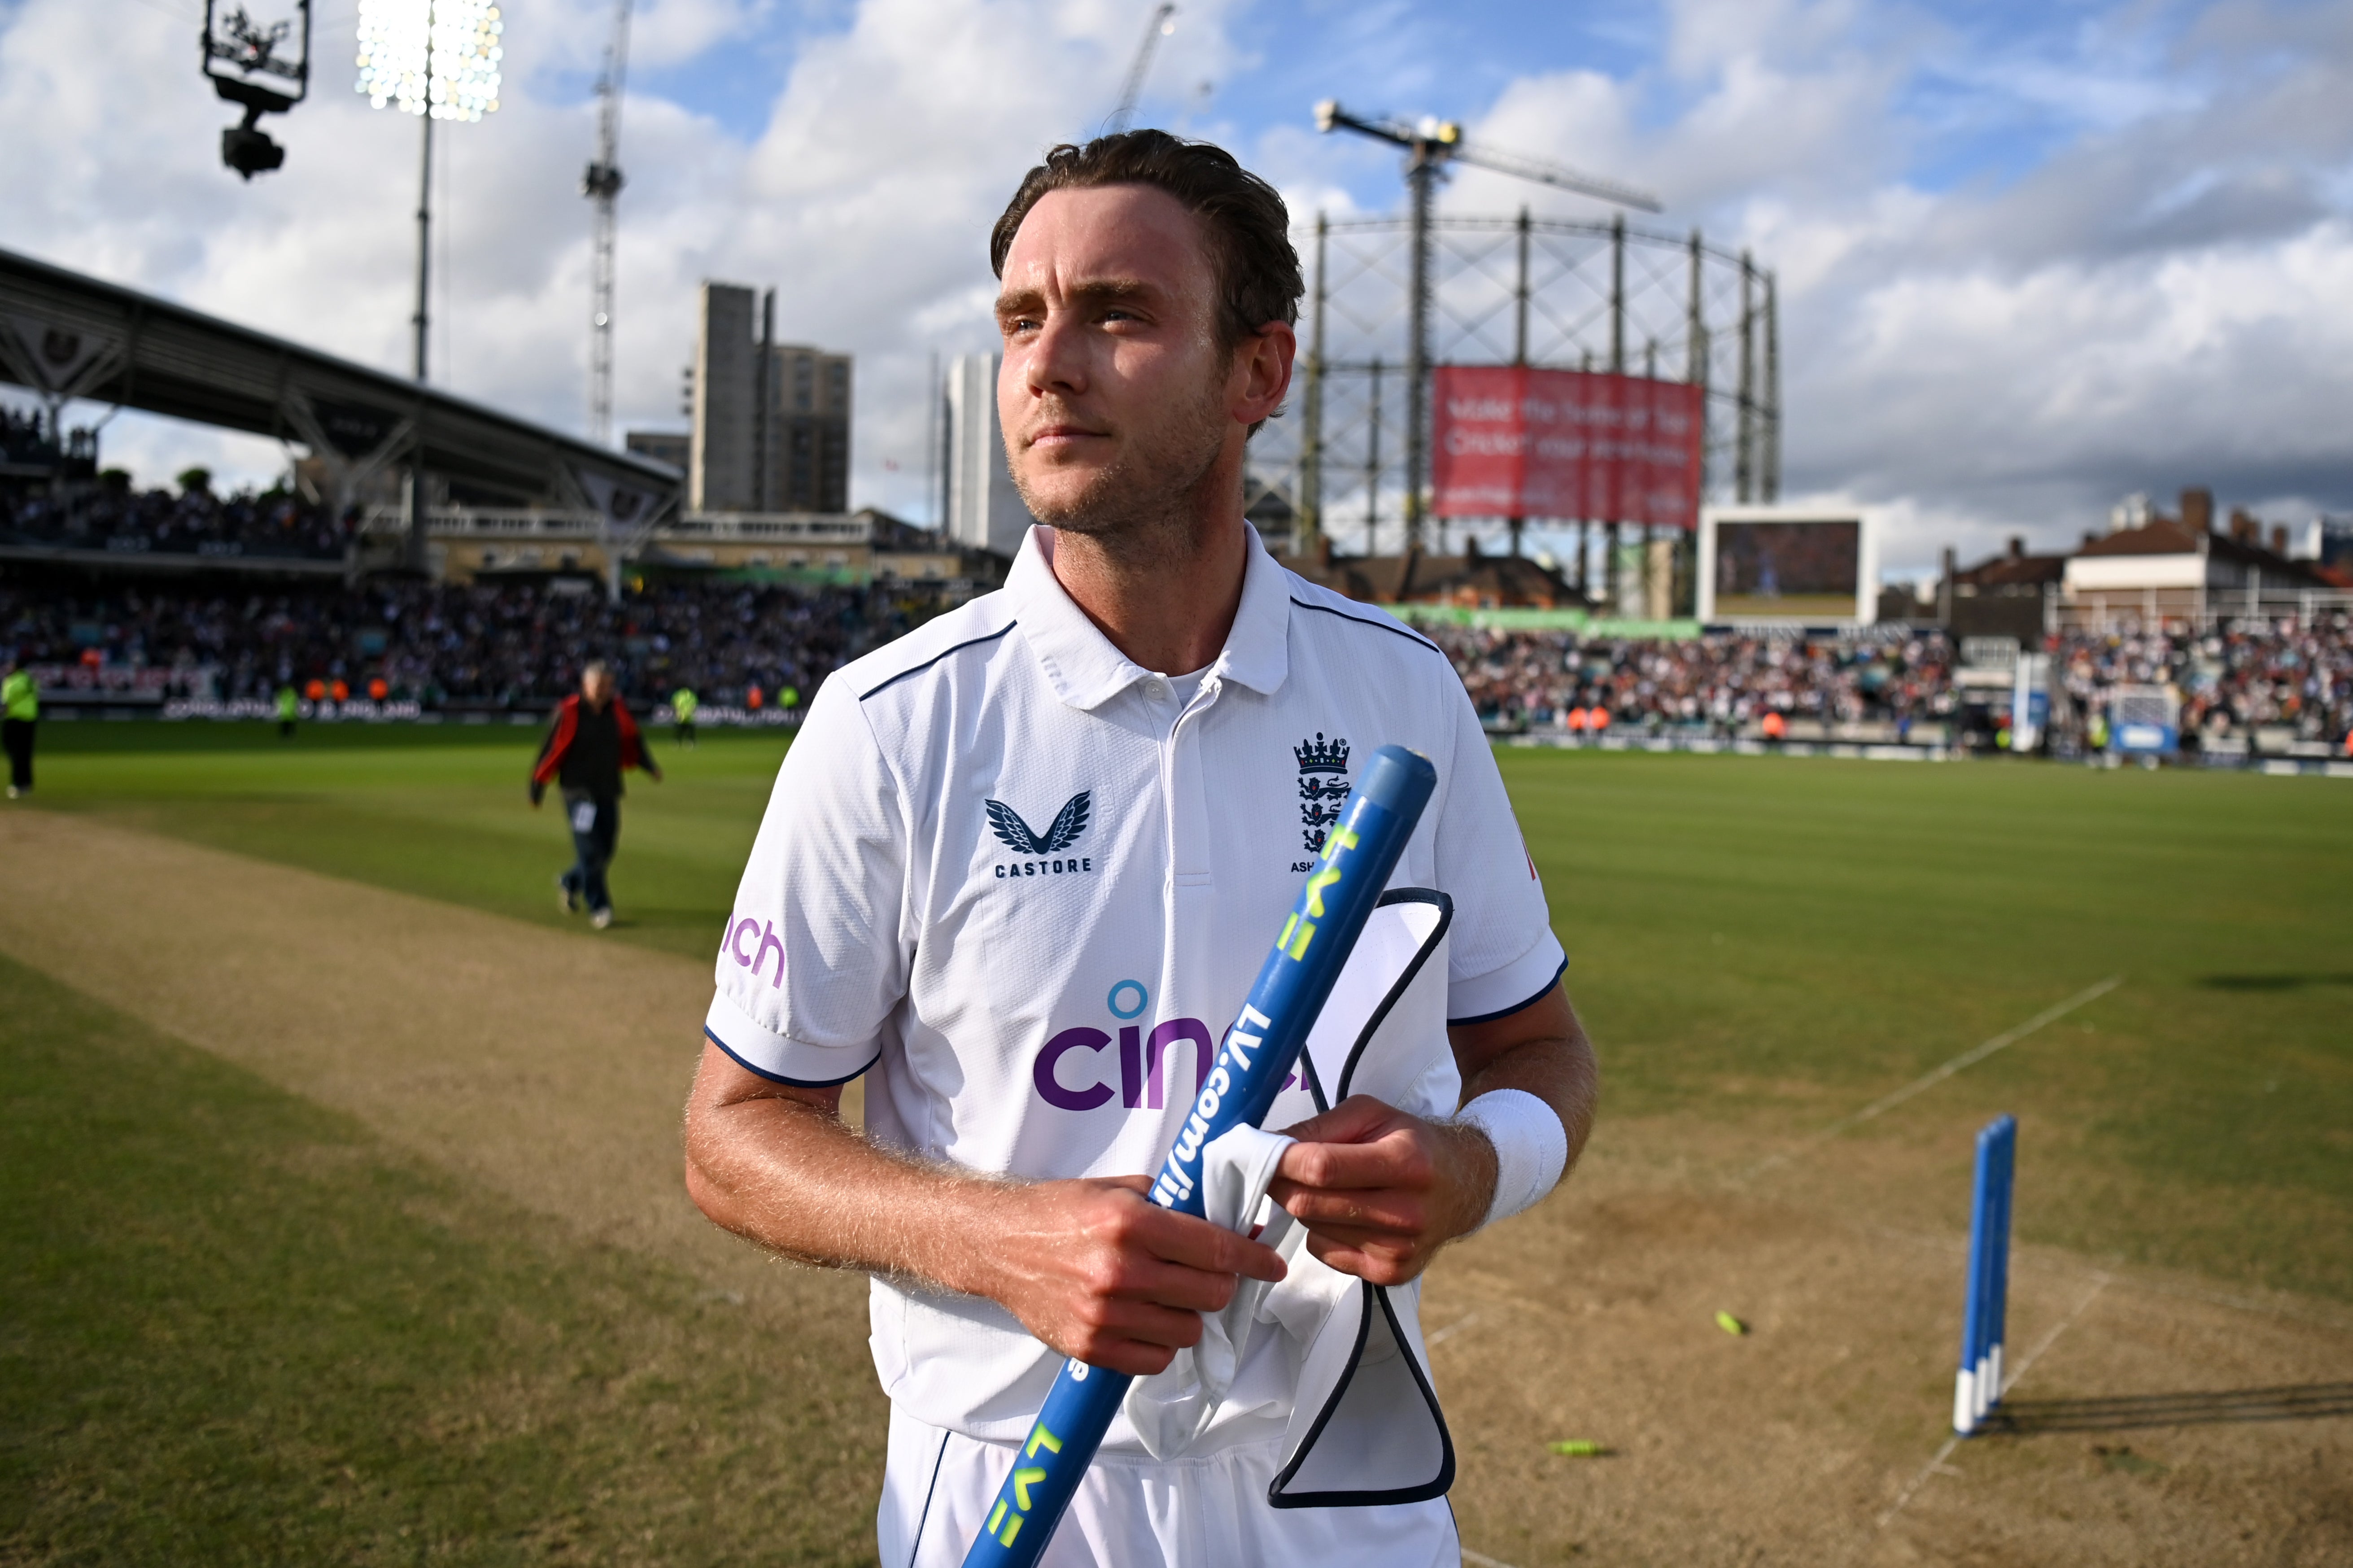 Broad enjoyed a fairytale finale to his cricket career